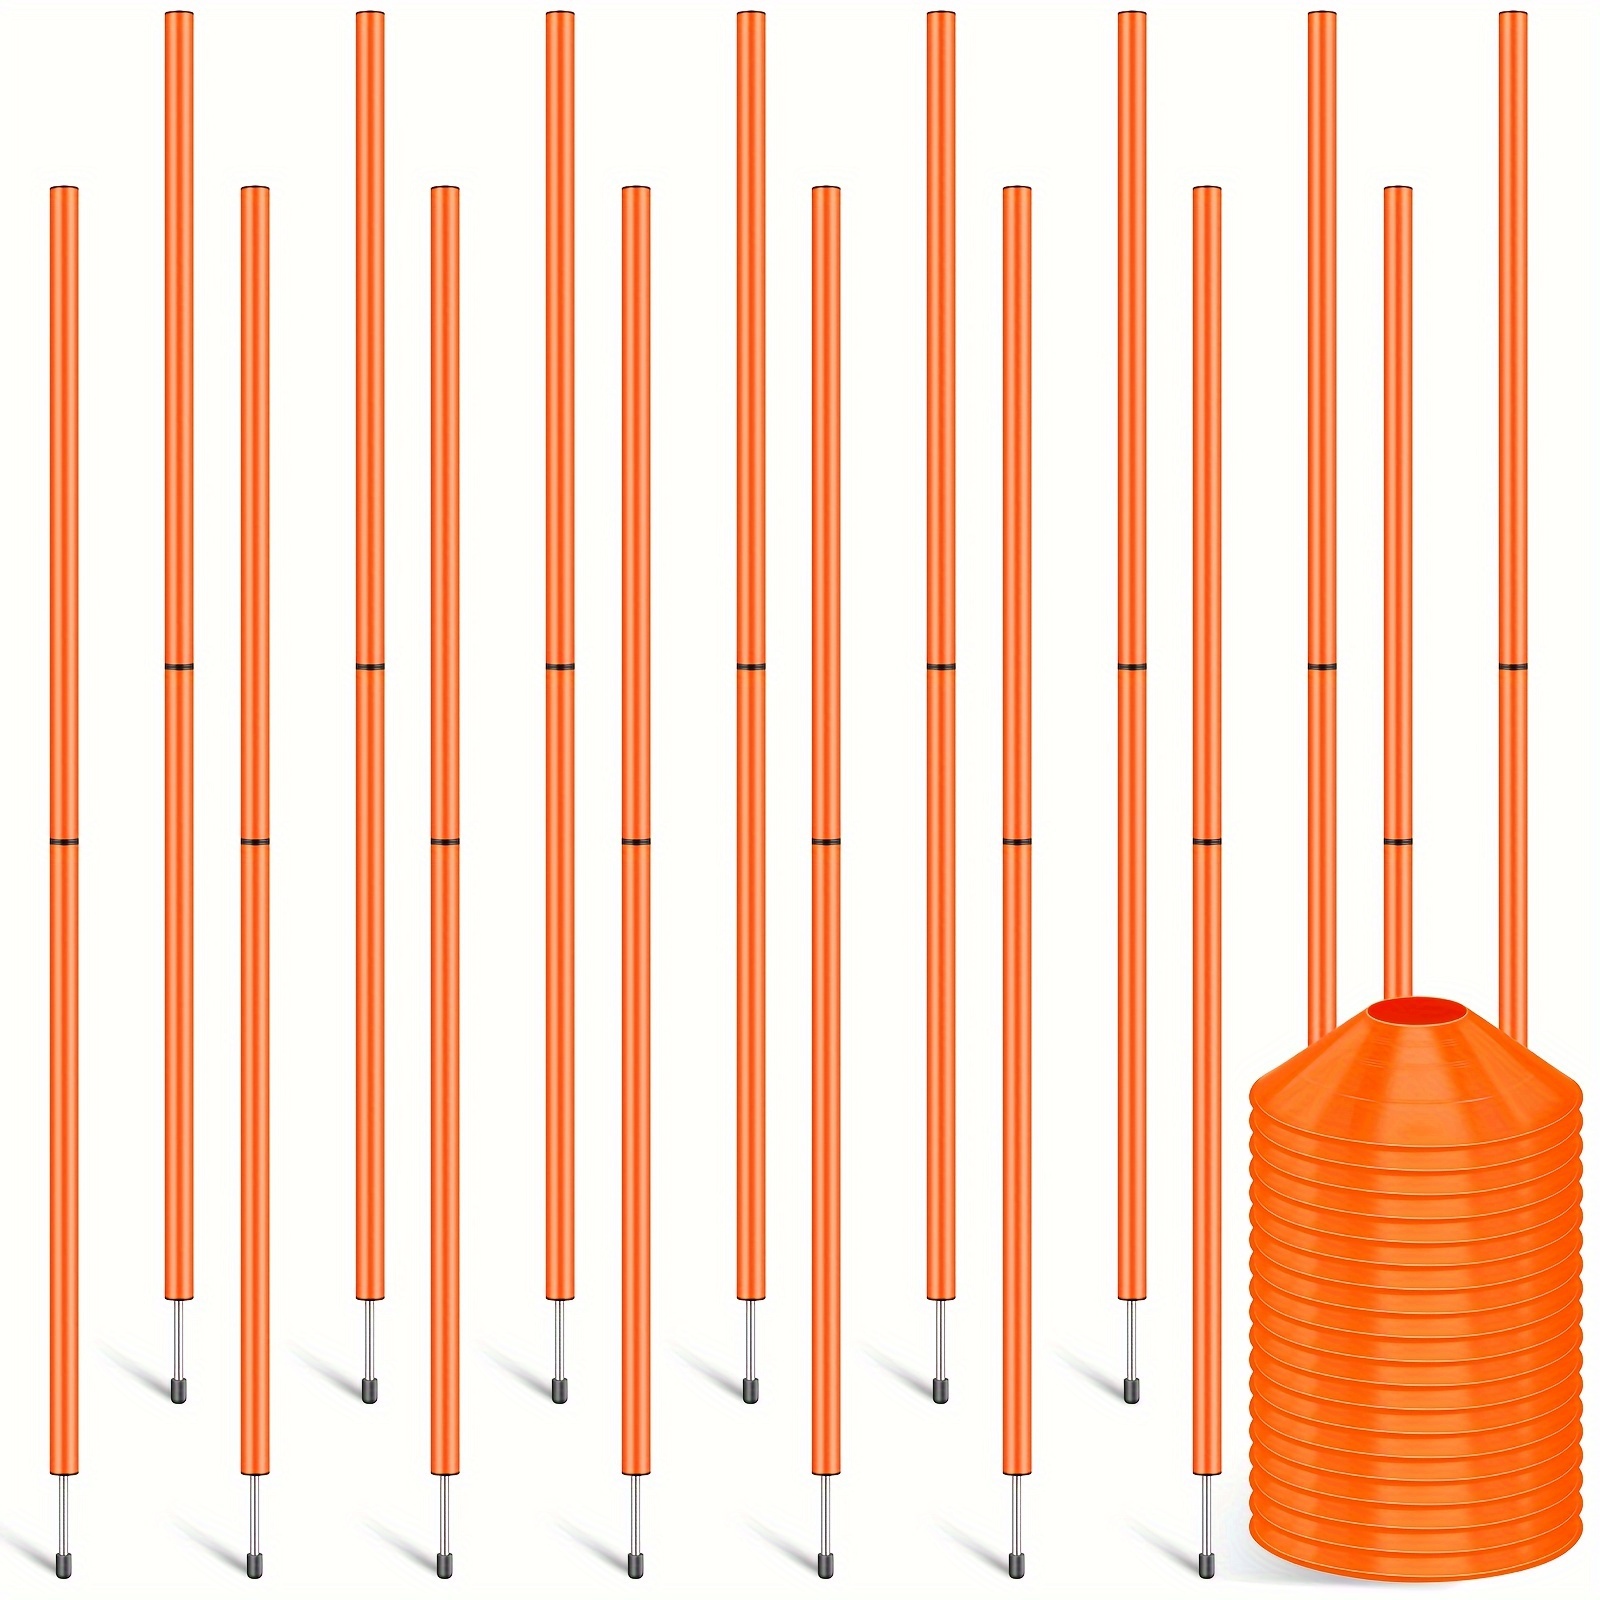 

36 Pcs Agility Training Equipment Include 16 Agility Training Poles 5ft And 20 Agility Soccer Cones Forza Agility Training Set For Soccer Sports Agility Speed Training